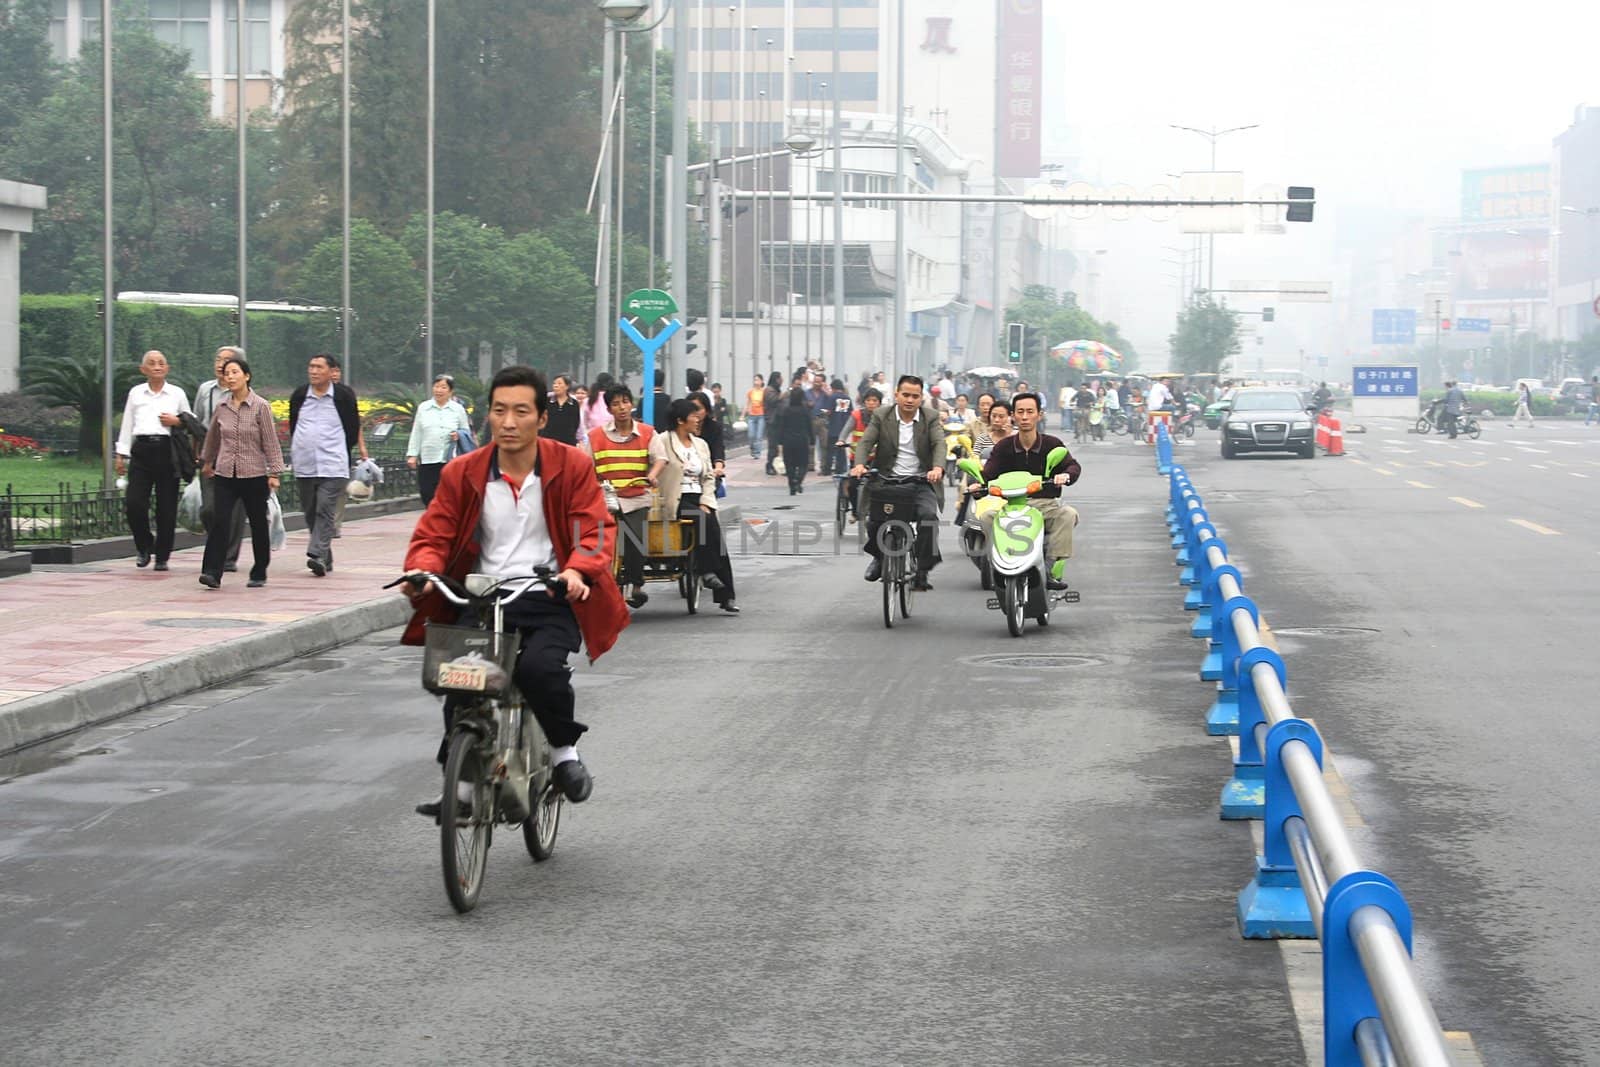 CHENGDU, CHINA - SEPTEMBER 16: Special line for bicyles, pedicabs on the multilane road on September 16, 2006 in Chengdu, Sichuan, China